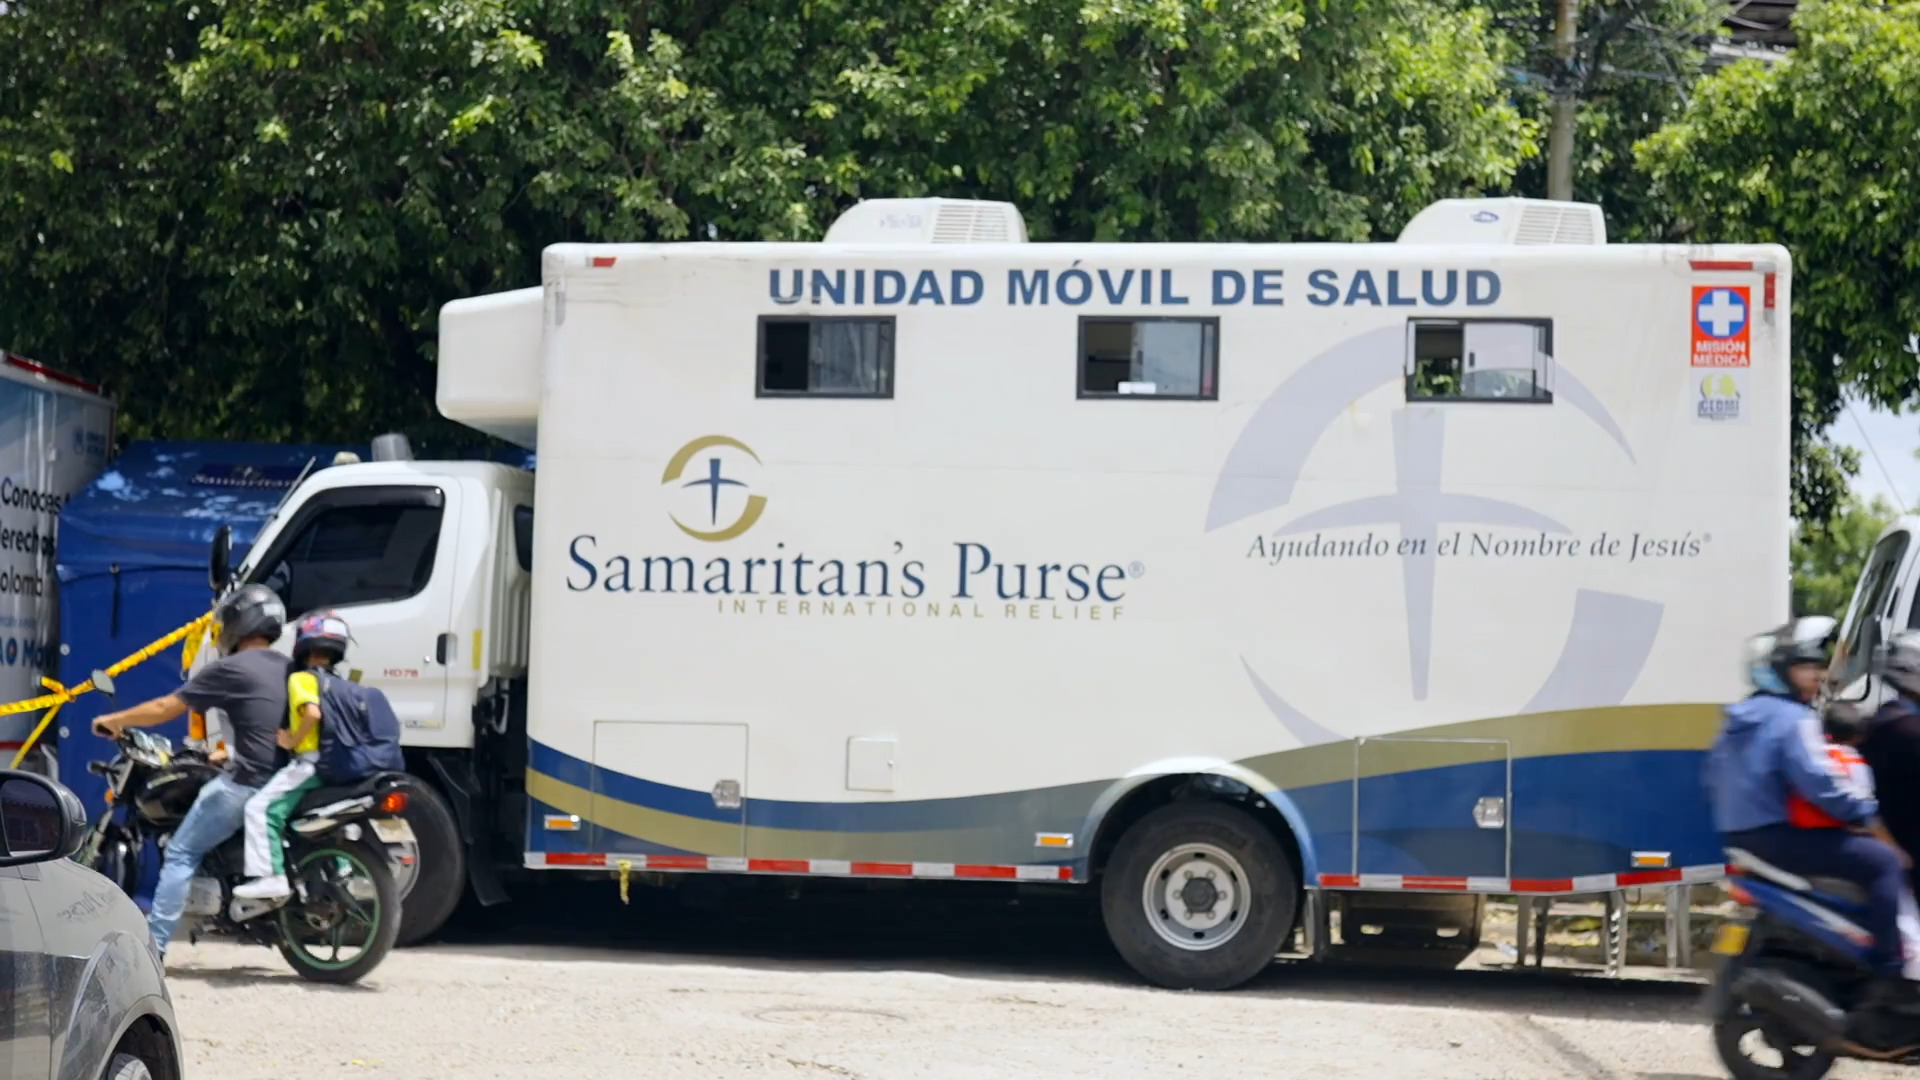 Get Involved with World Medical Mission - Samaritan's Purse Canada